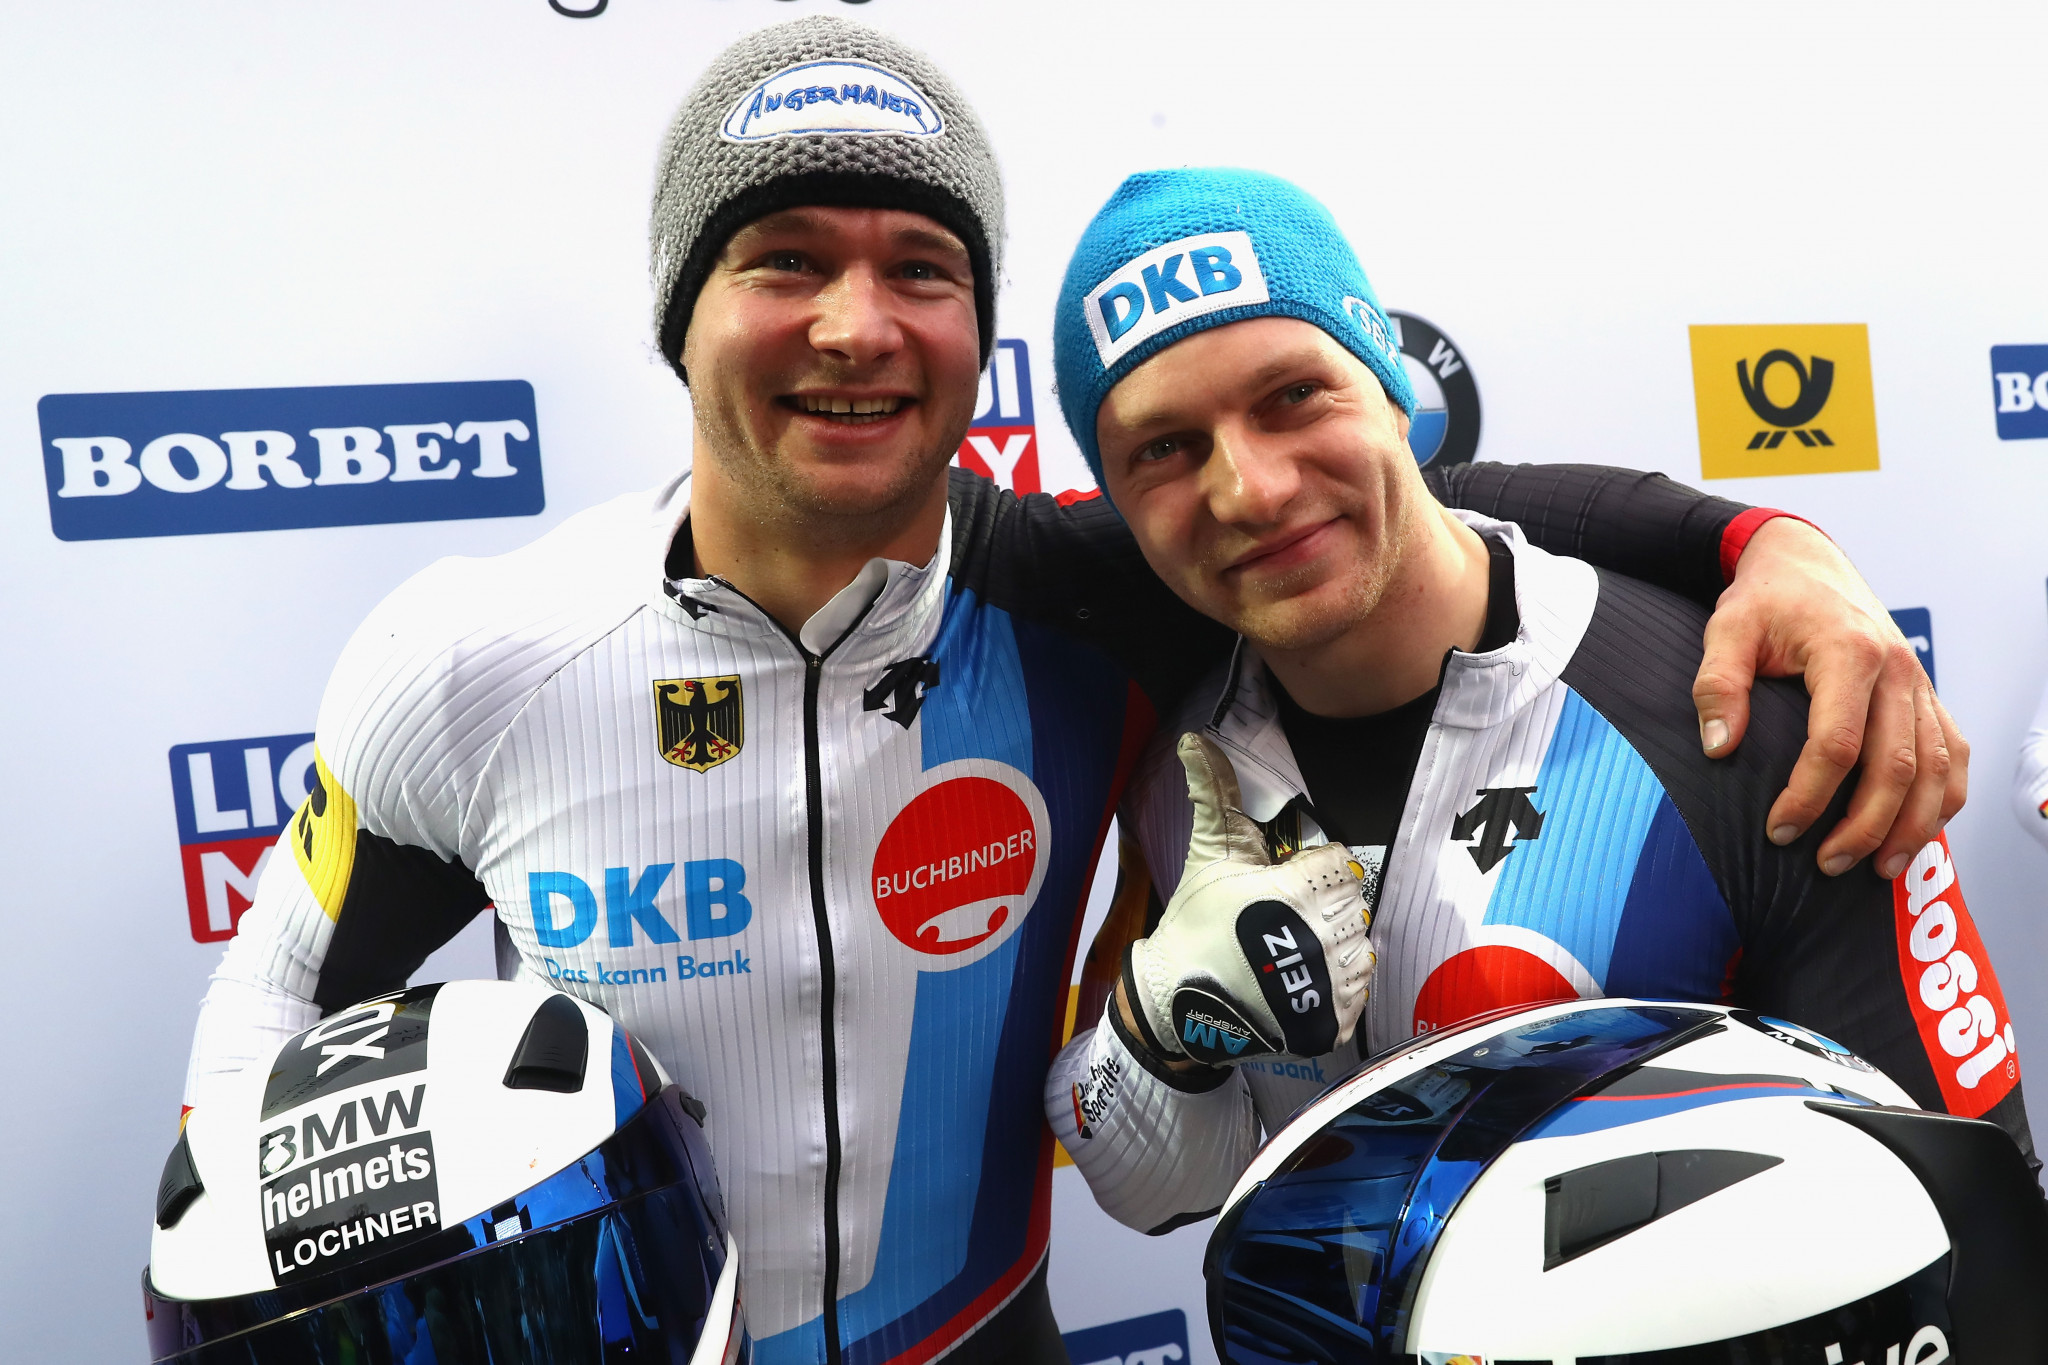 Germany's Johannes Lochner, left, and Francesco Friedrich, right, are expected to battle for two-man bob gold again at the second IBSF World Cup event at the Olympic Sliding Centre ©Getty Images